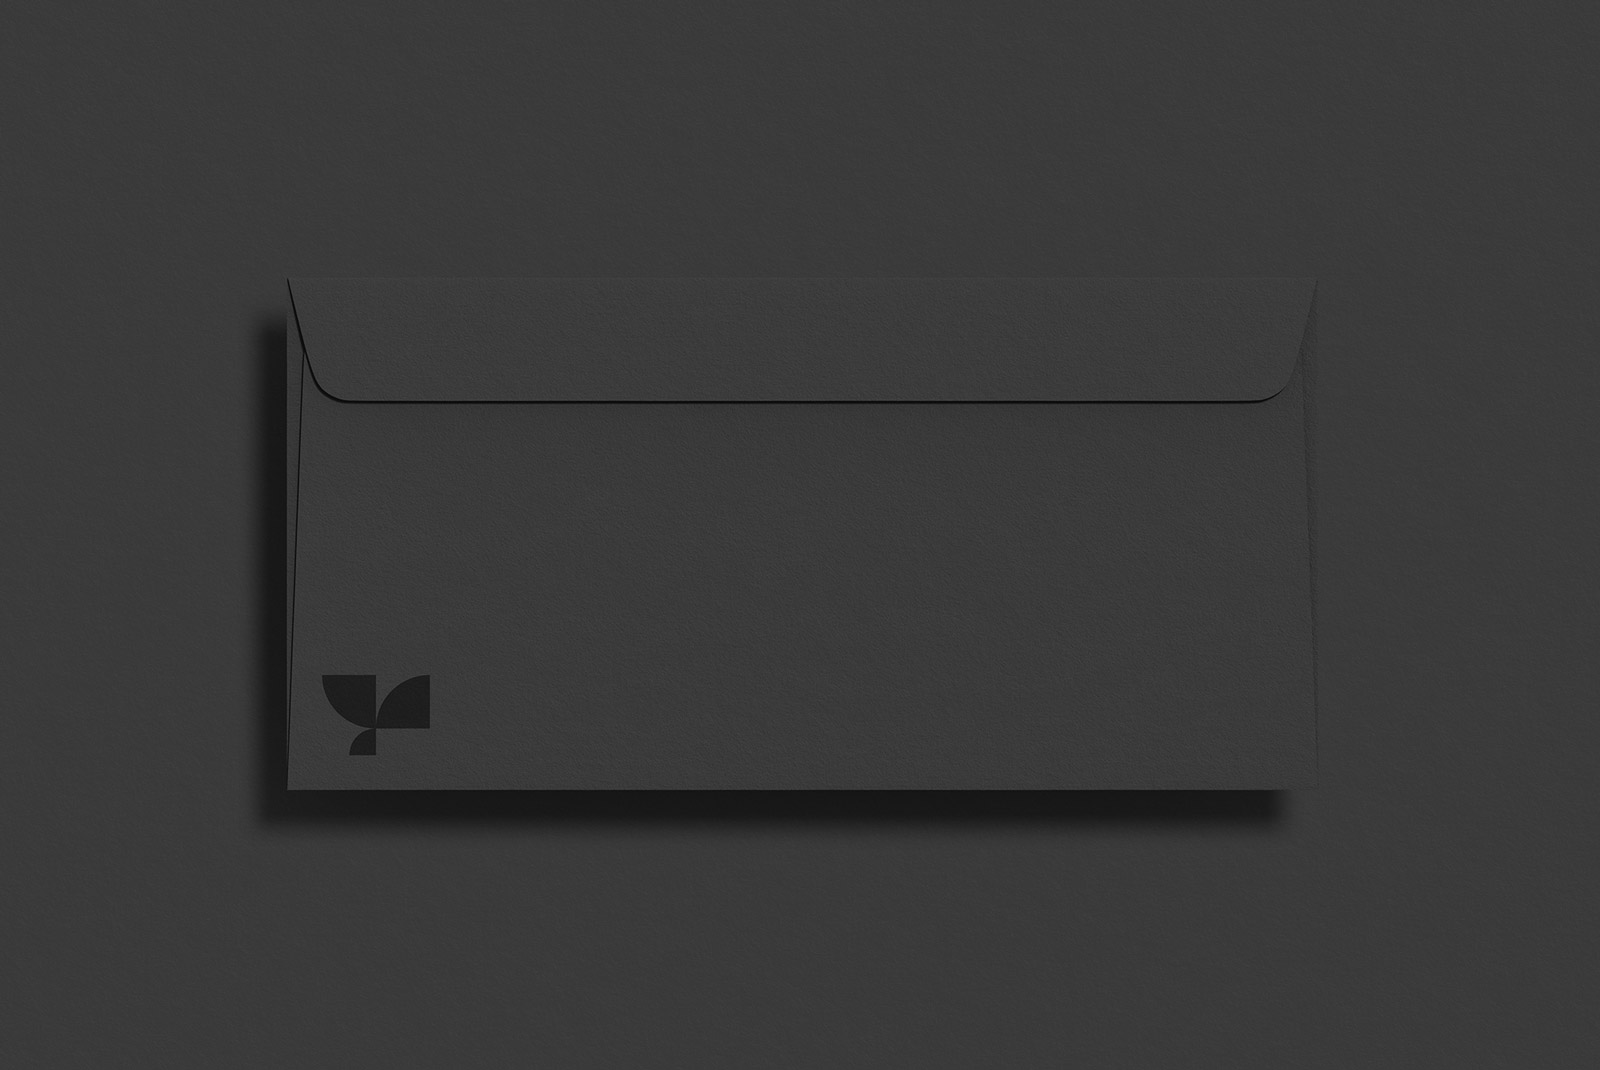 Black envelope mockup with minimalist branding on dark background, perfect for presentation and graphic design assets.